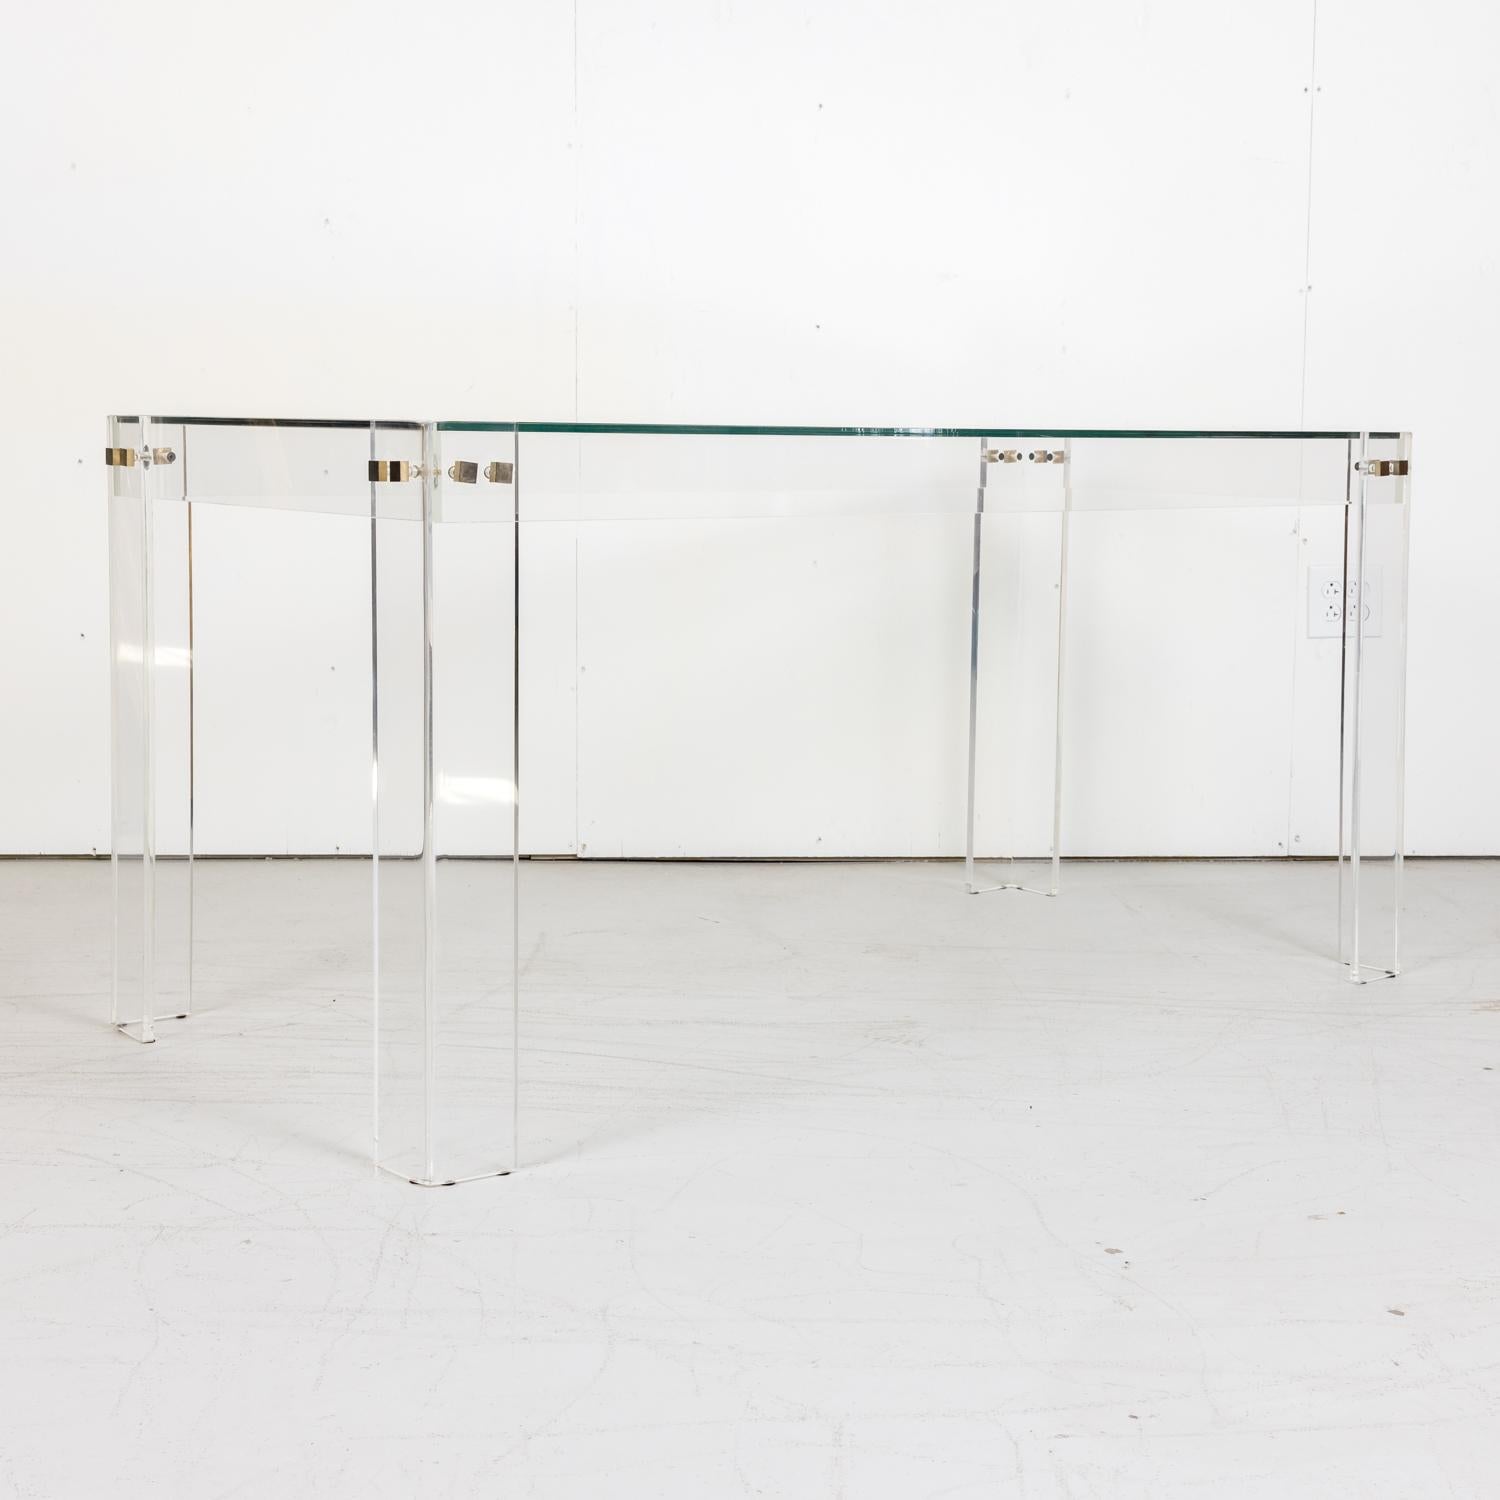 A fabulous vintage 1970s French Acrylic and glass top desk or console table having square brass fasteners. Could also be used as a dining table.

Dimensions:
H - 29